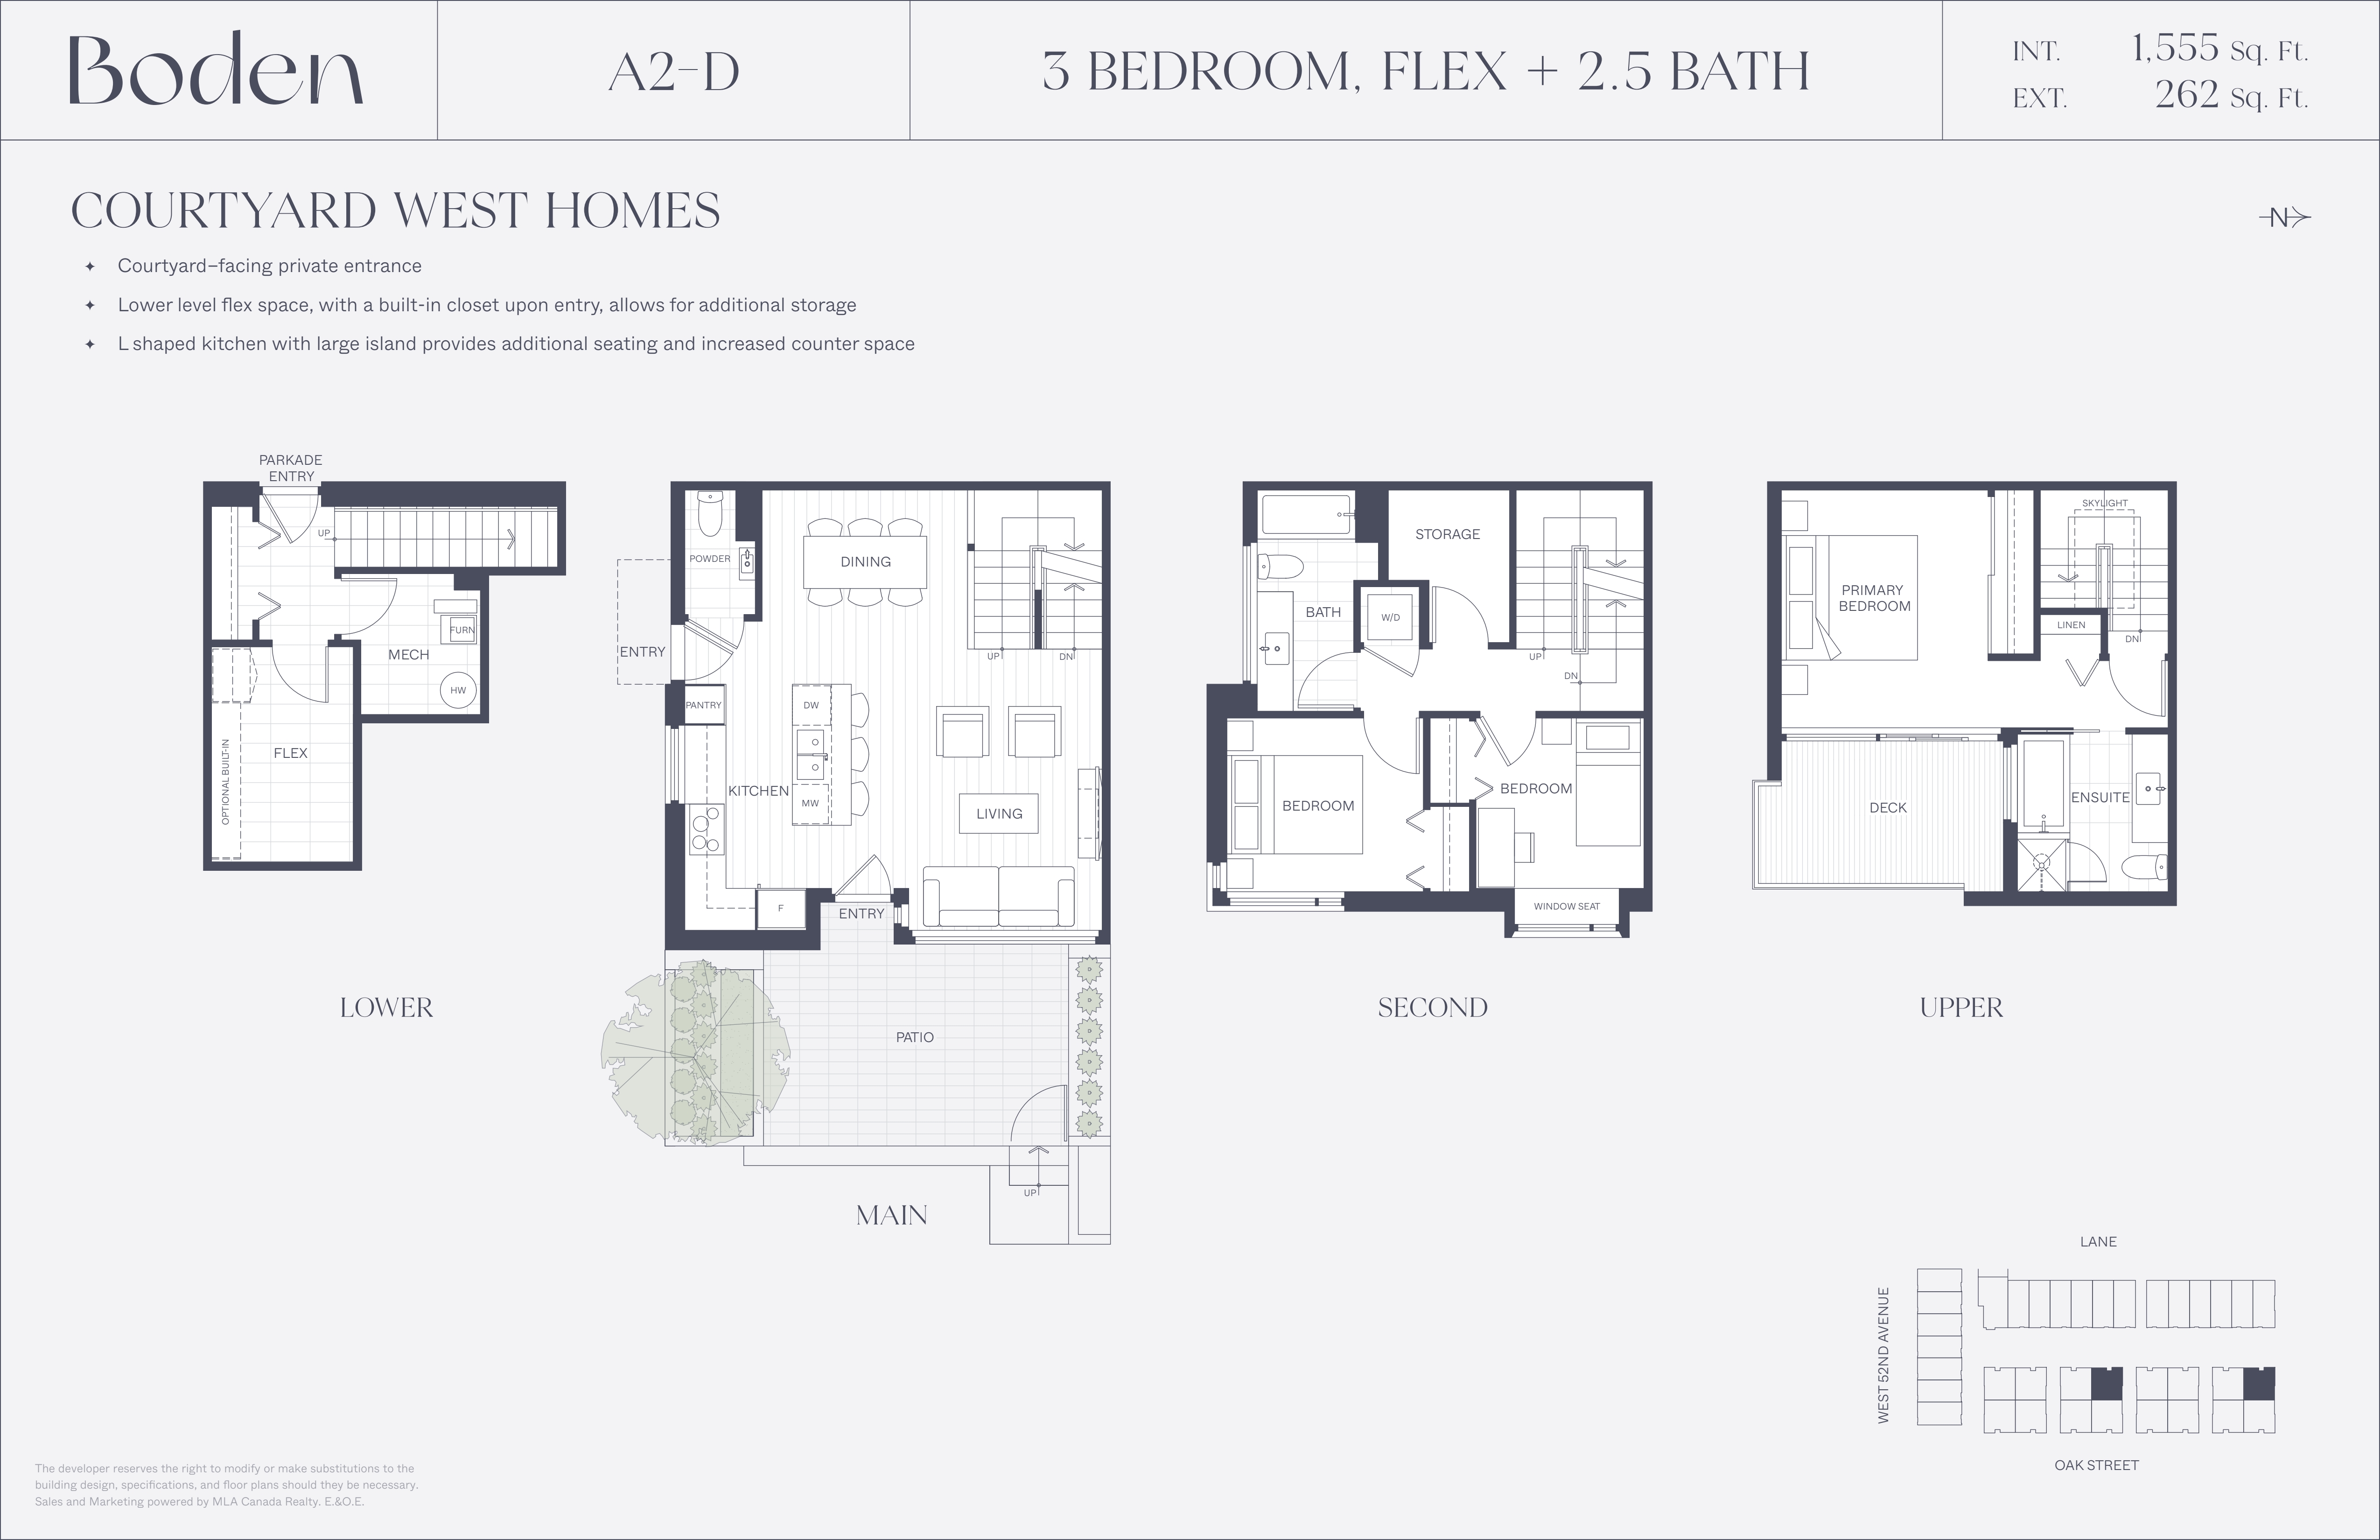  A2-D (Courtyard)  Floor Plan of Boden Towns with undefined beds